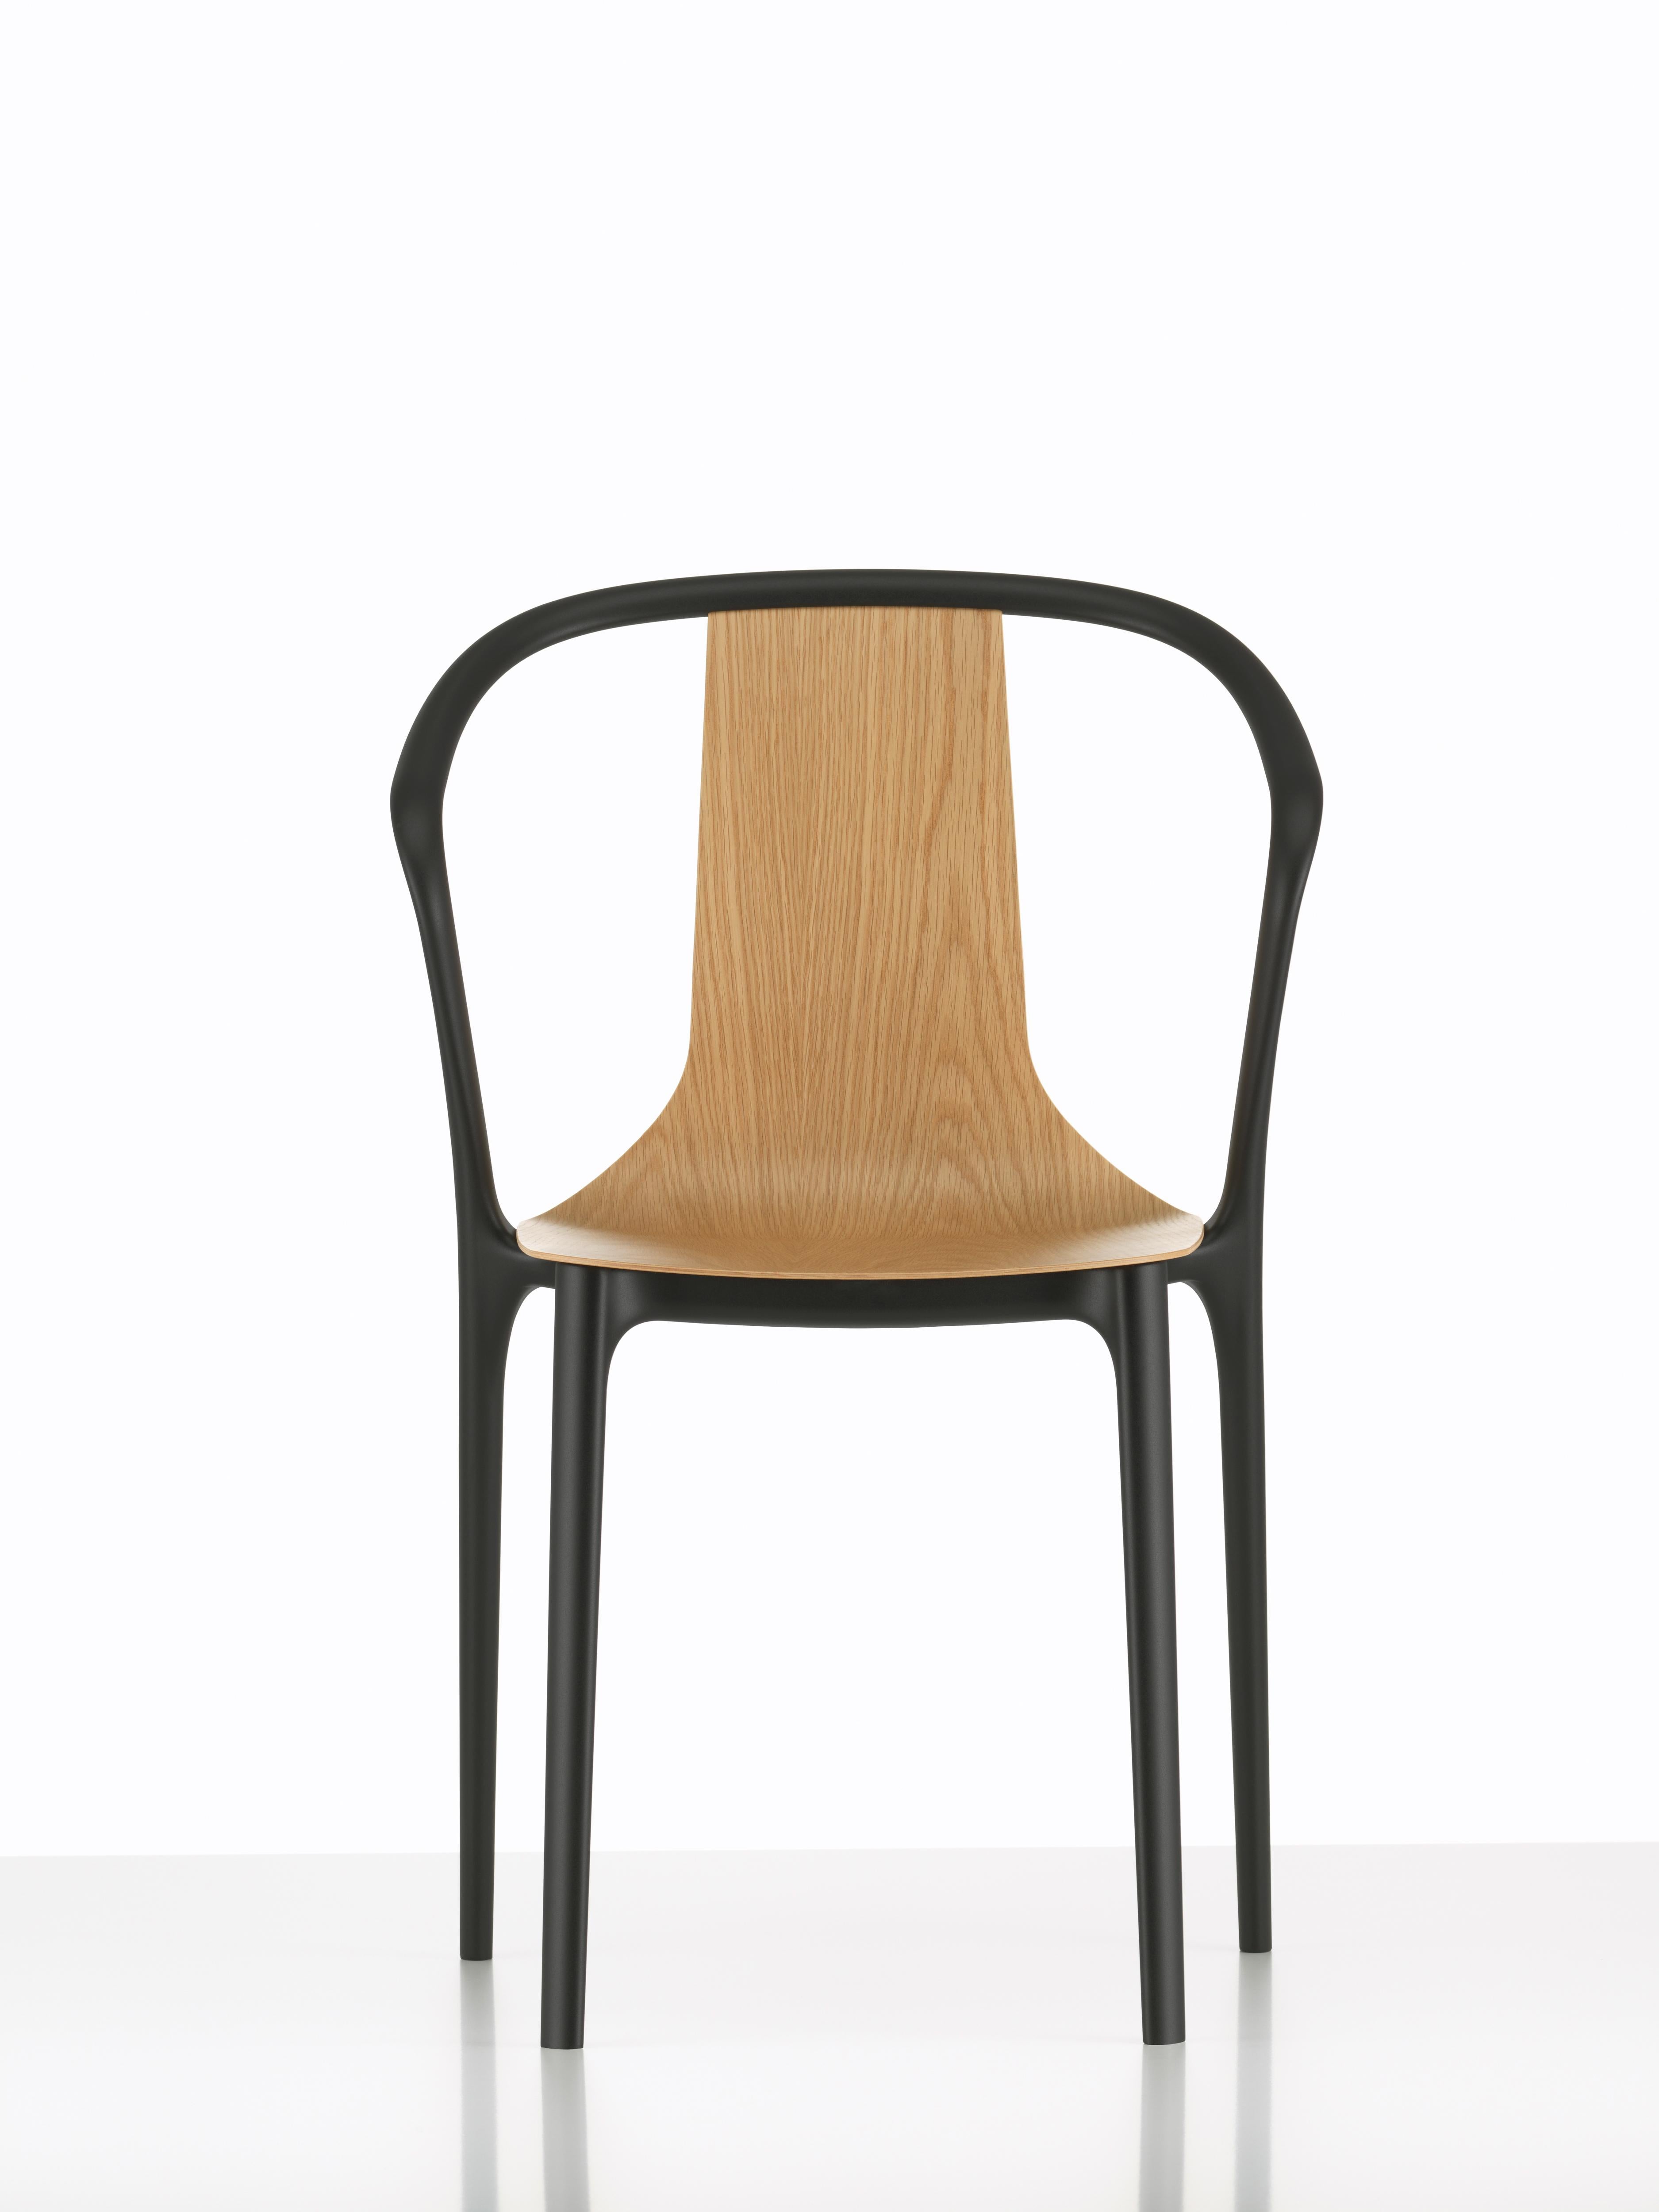 Vitra Belleville Armchair in Natural Oak by Ronan & Erwan Bouroullec In New Condition For Sale In New York, NY